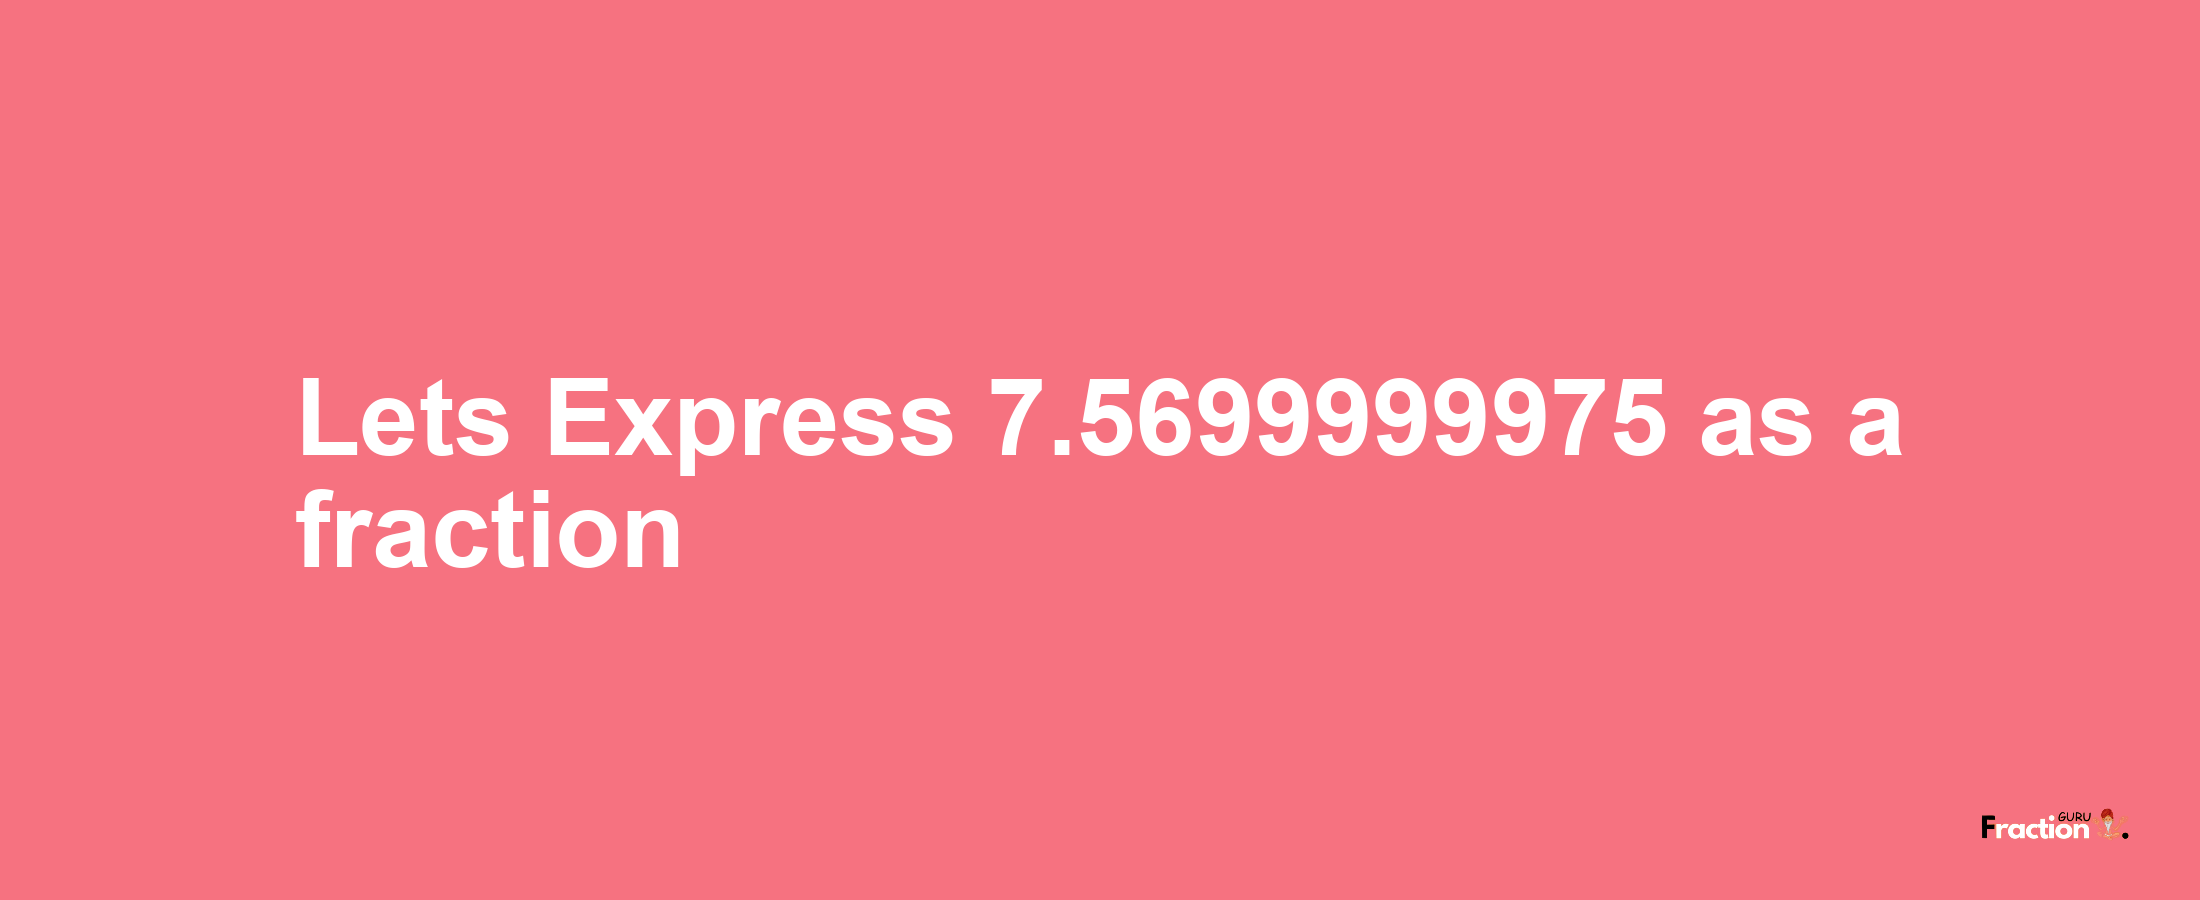 Lets Express 7.5699999975 as afraction